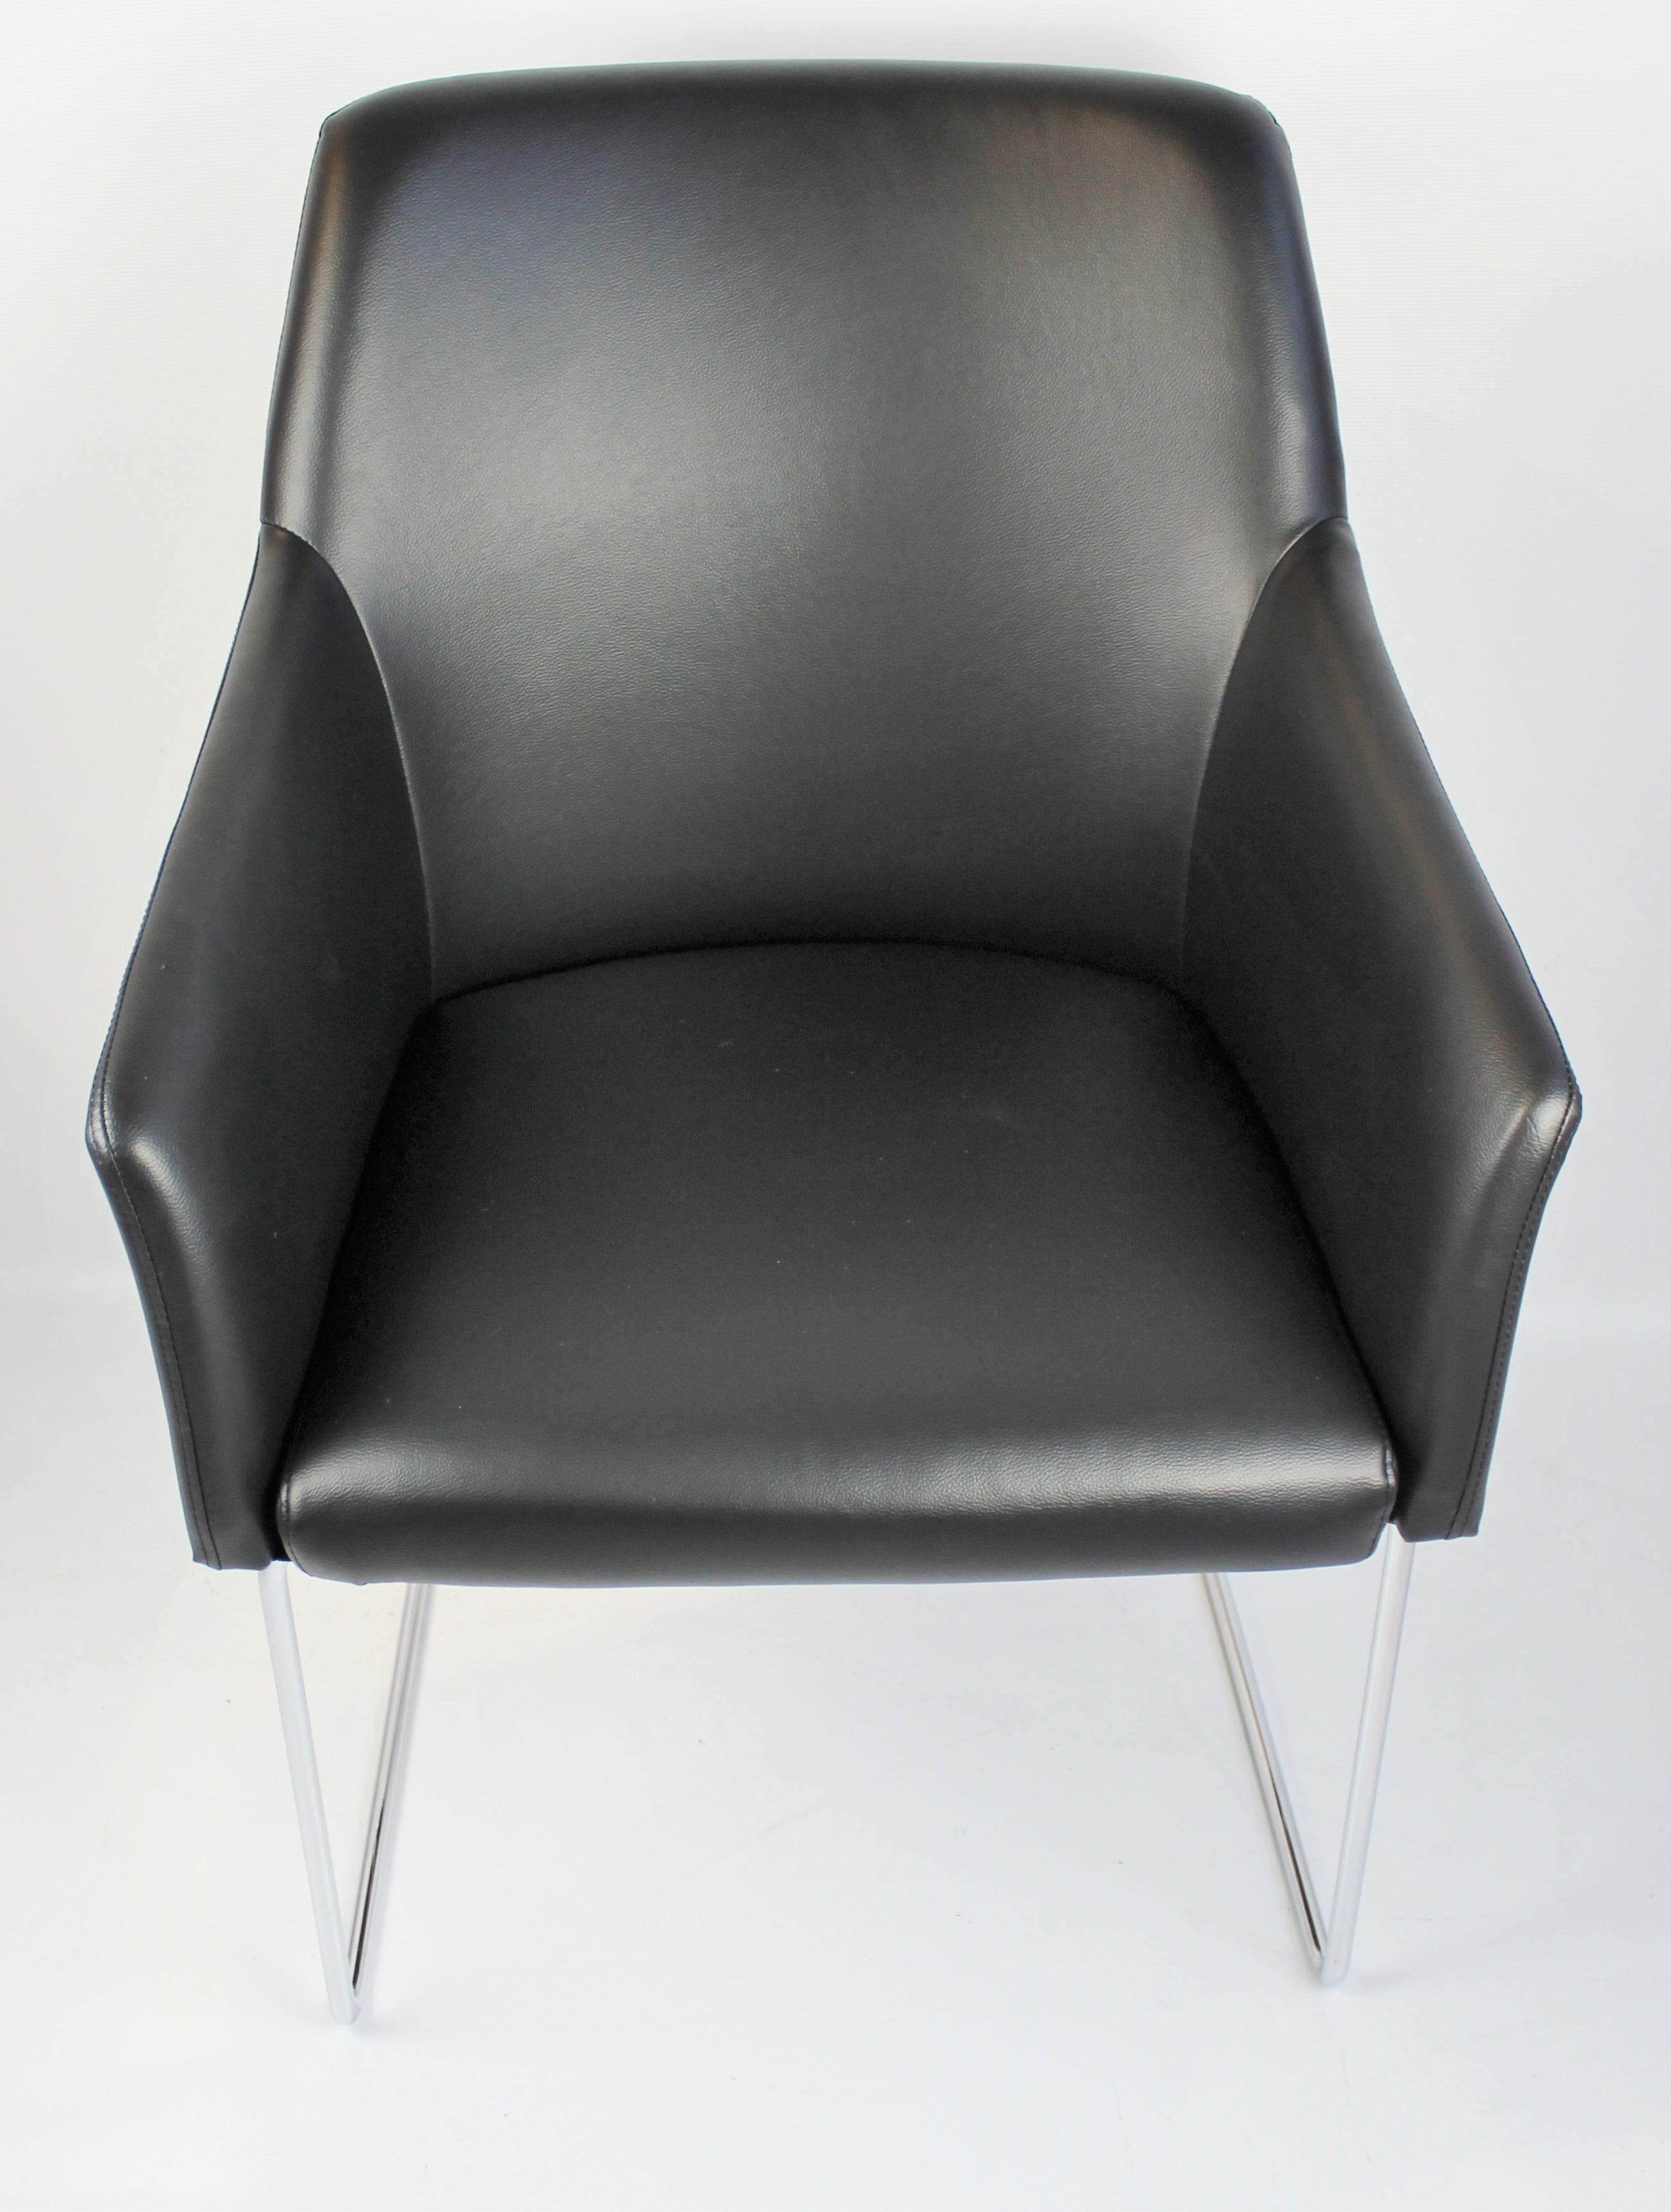 Modern Bonded Black Leather Visitor Chair - CHA-072